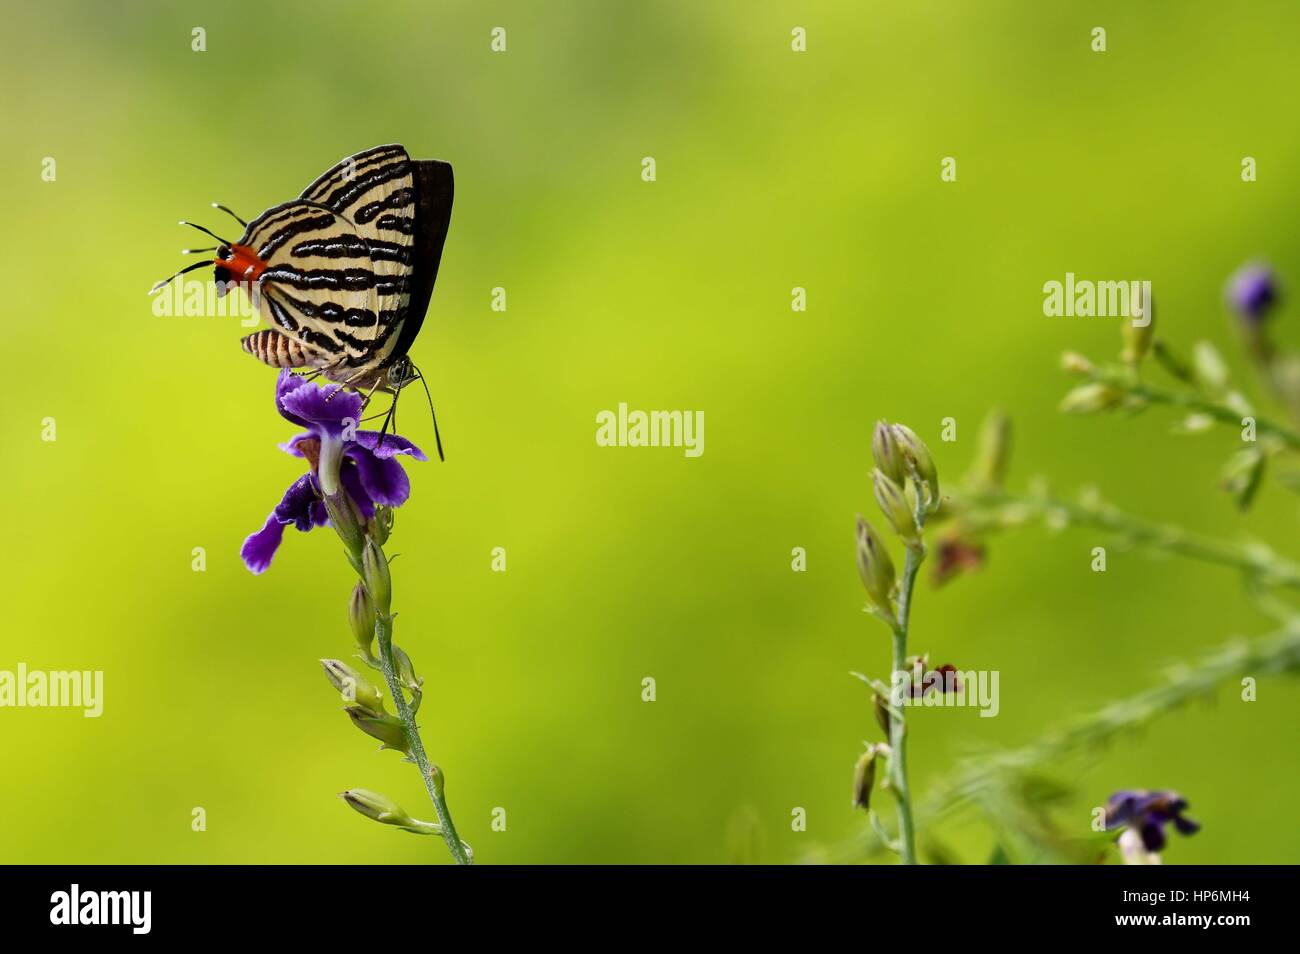 Silverline long-banded nectar potable. Banque D'Images